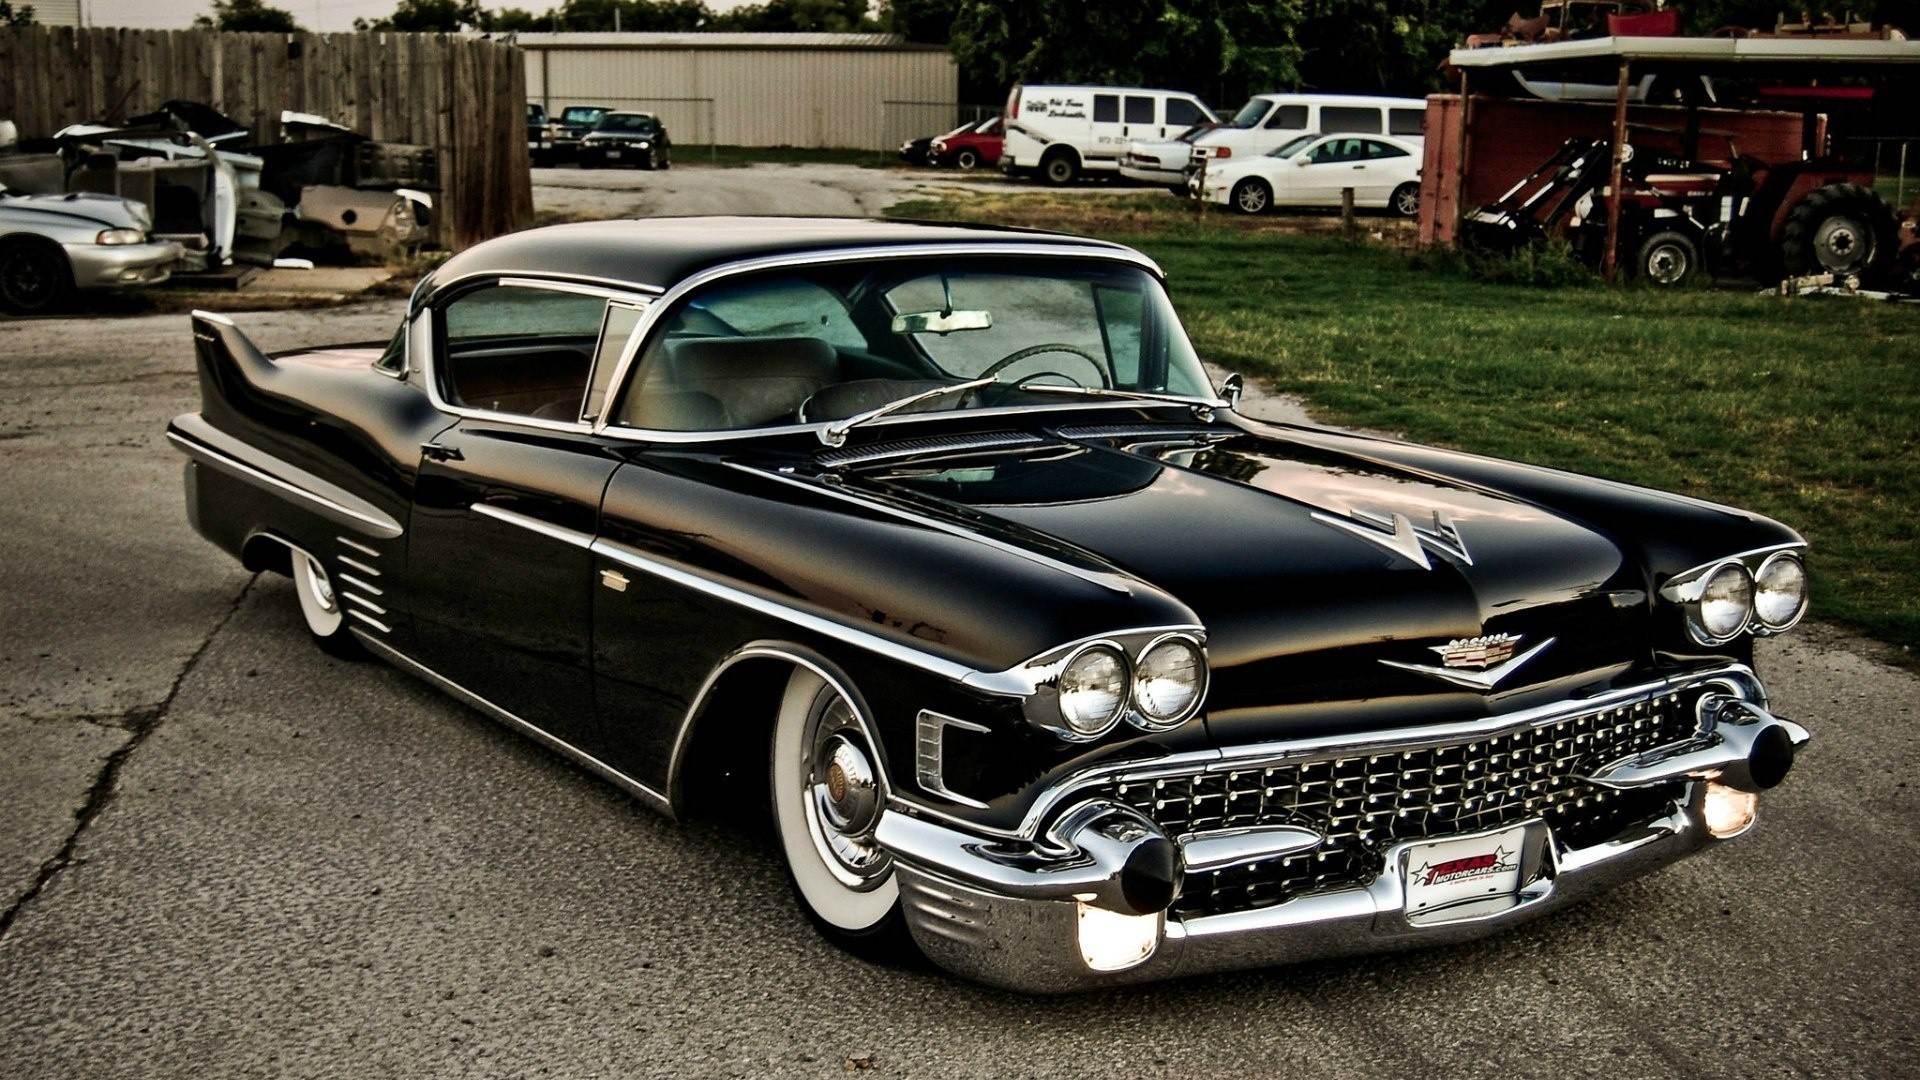 General 1920x1080 car Cadillac vehicle black cars oldtimers classic car stanced American cars